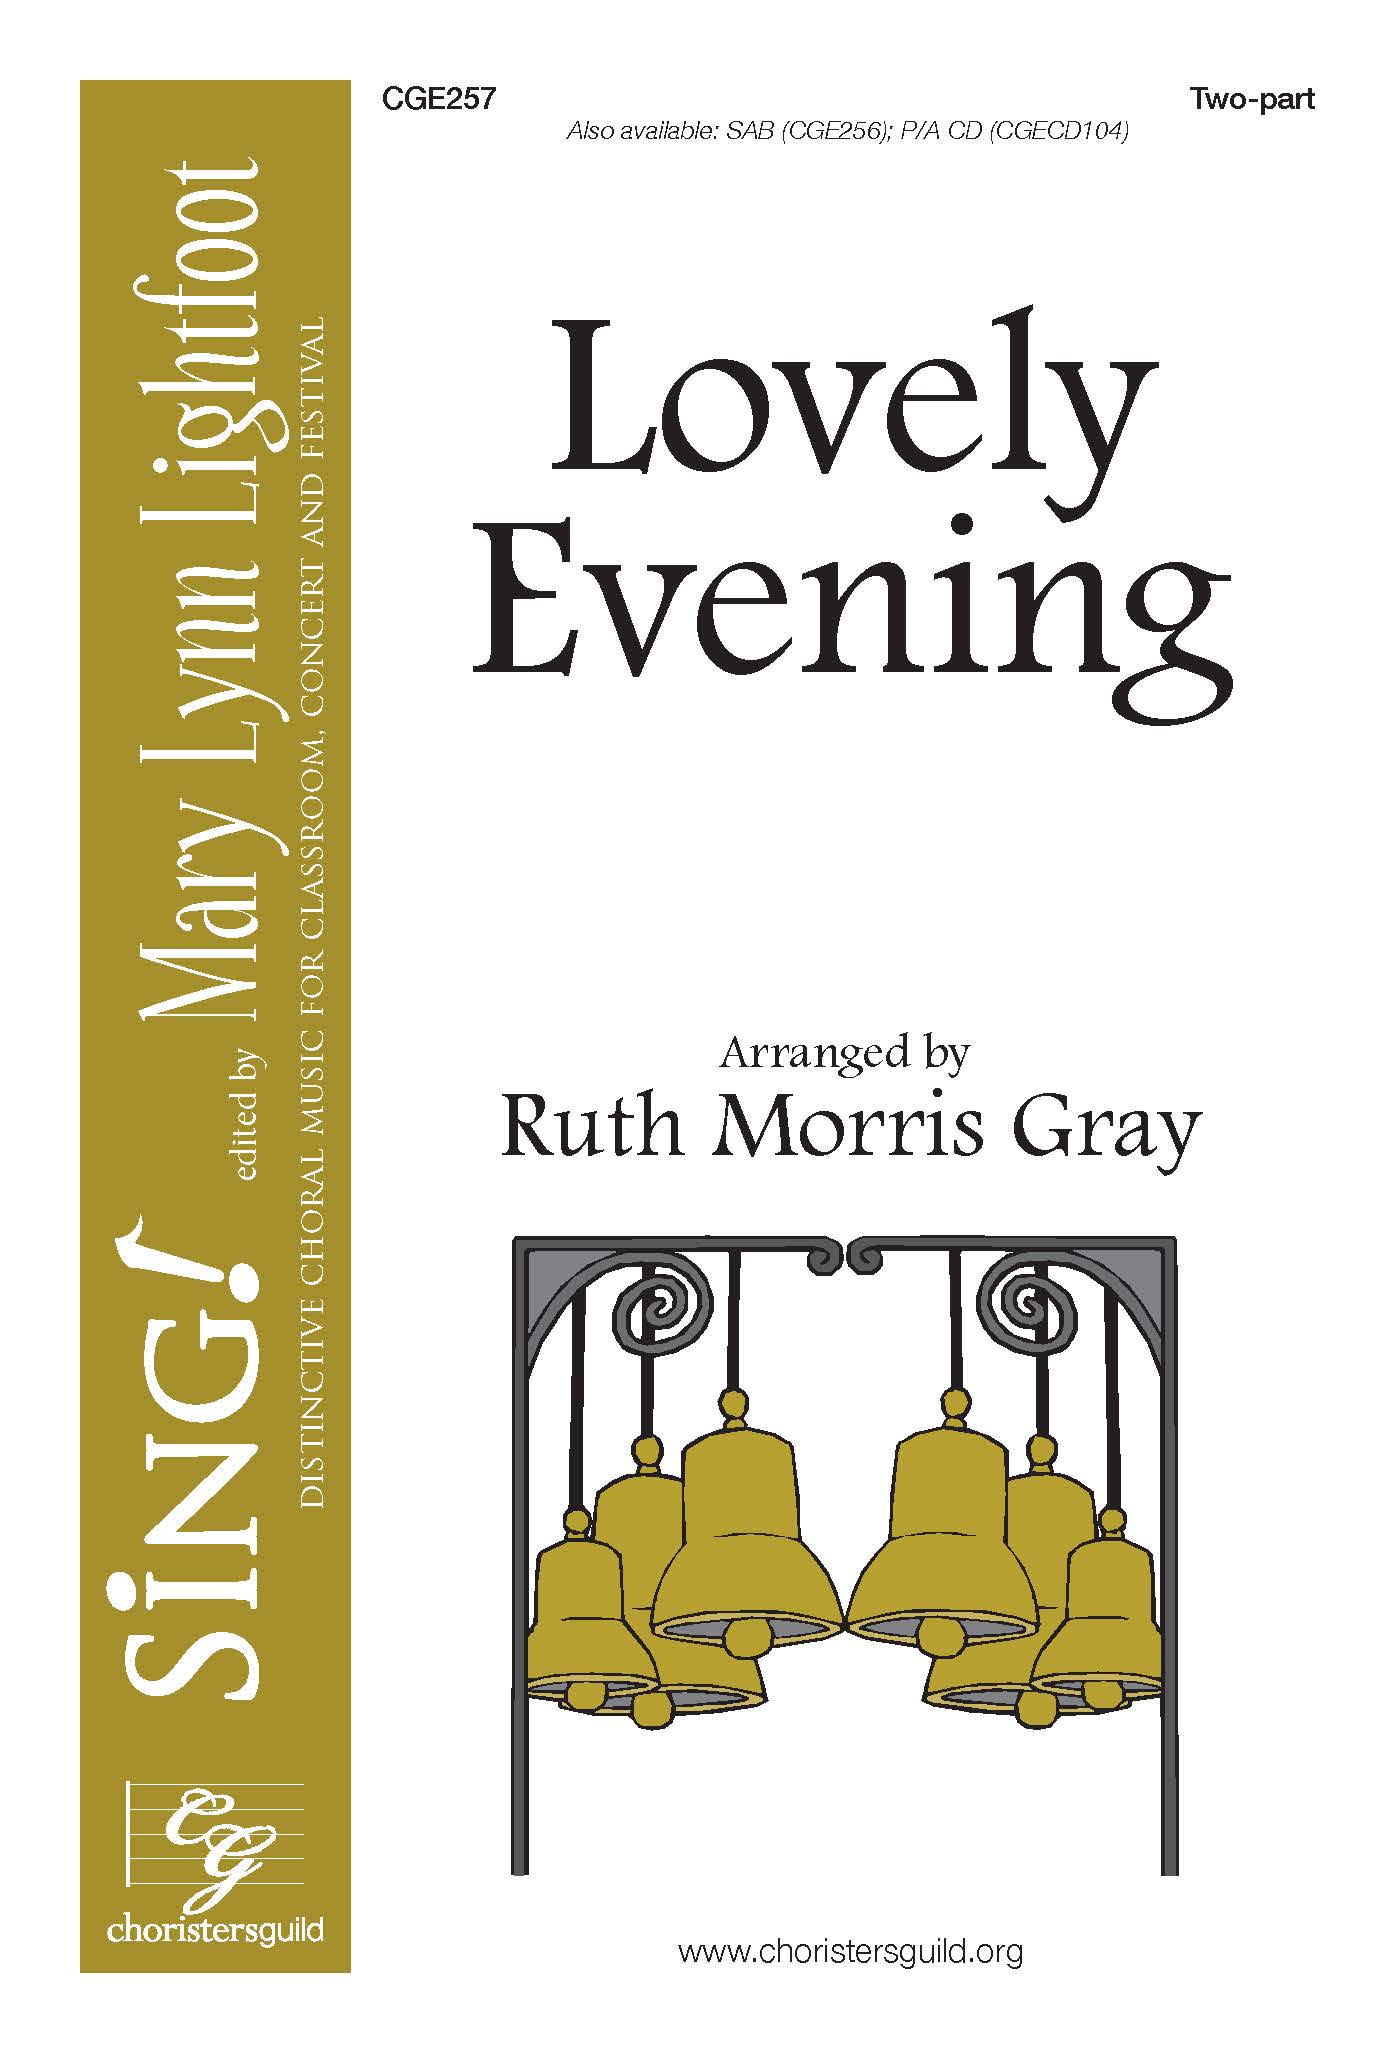 Lovely Evening Two-part